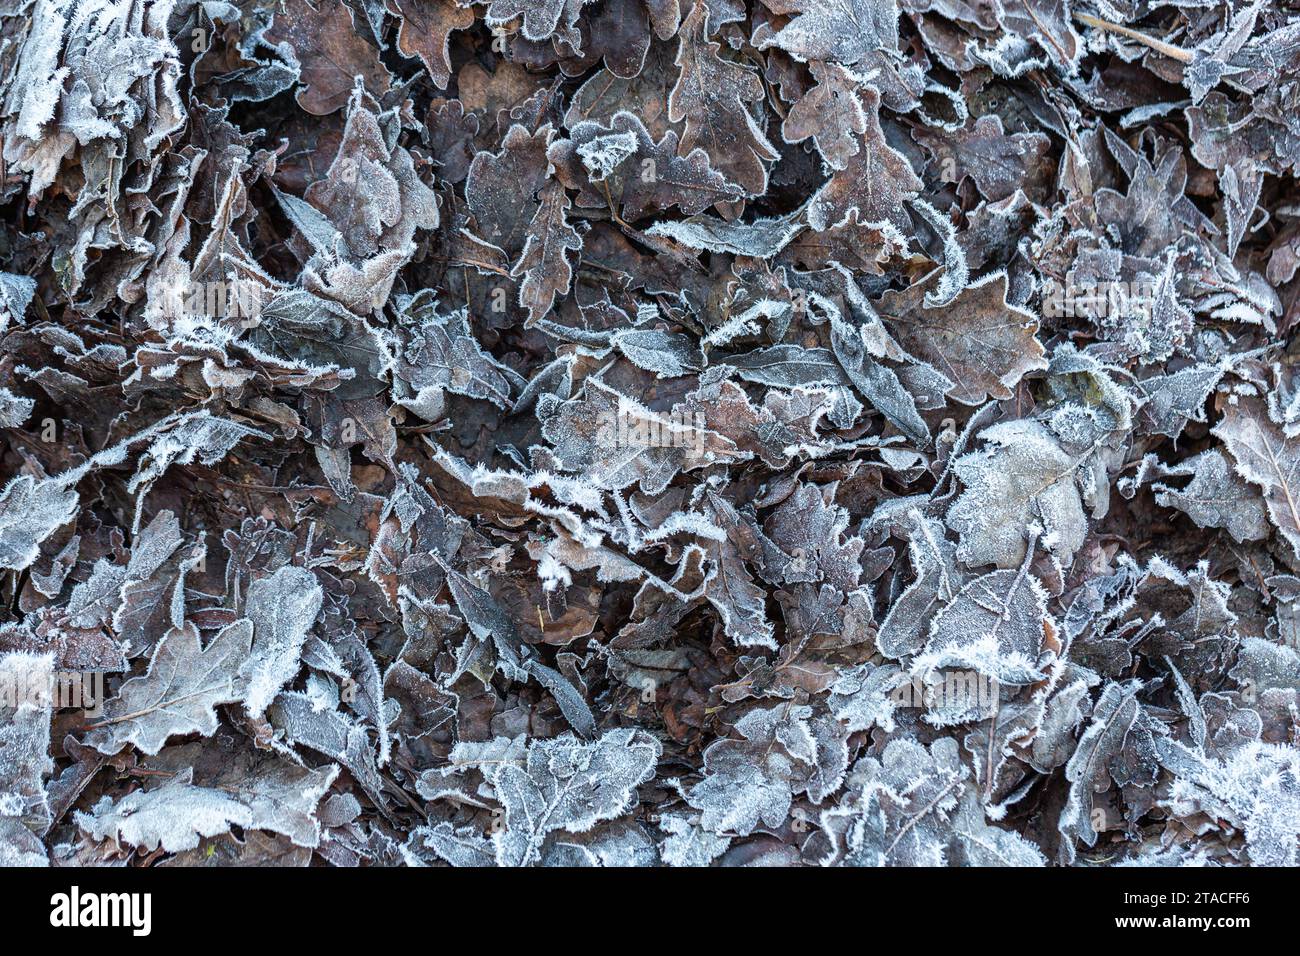 Dead leaves littering the ground covered in frost Stock Photo